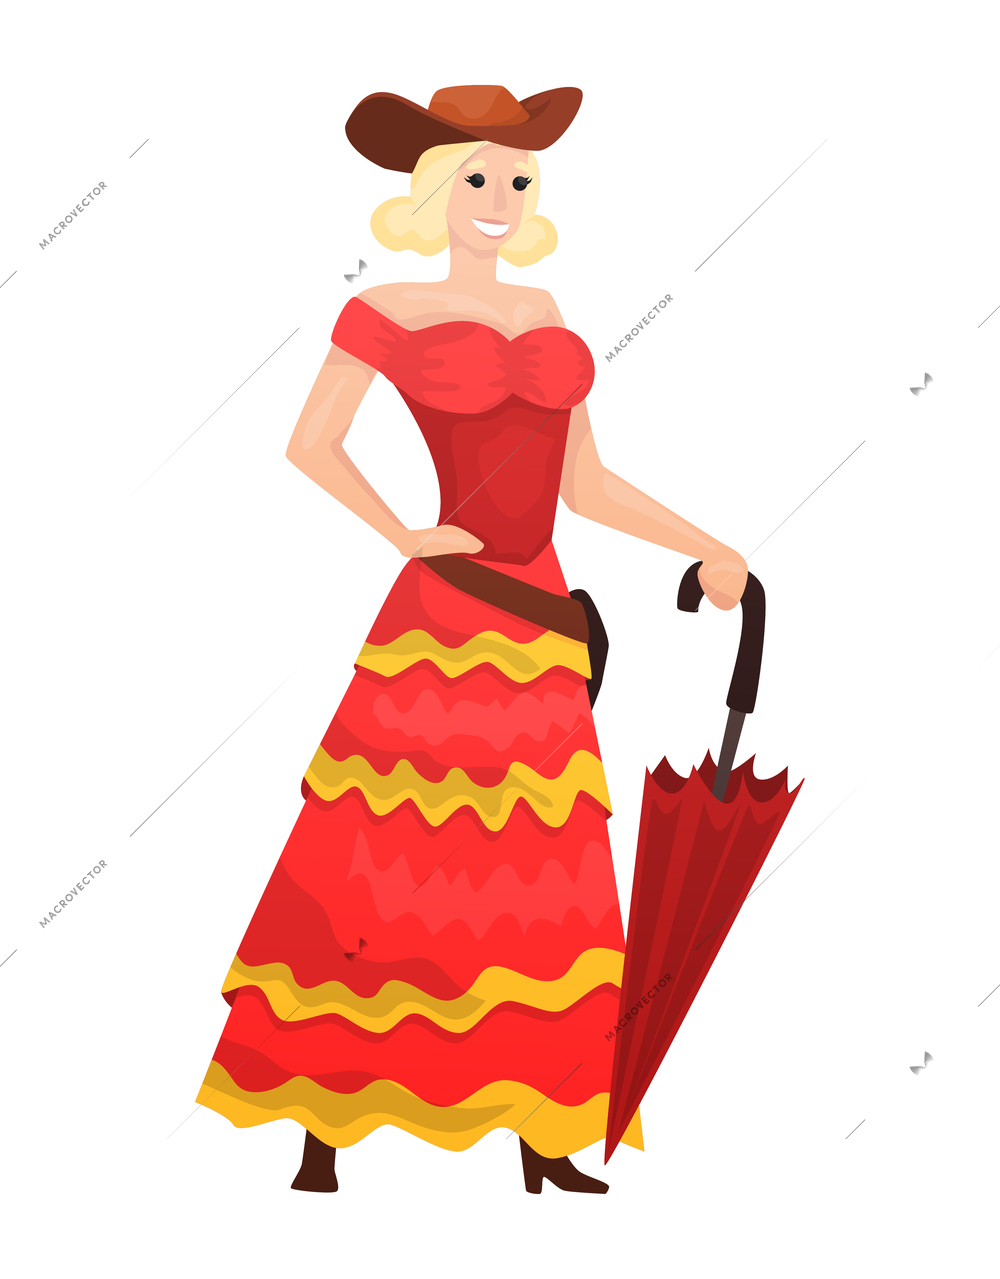 Wild west cowboy composition with isolated human character of lady on blank background vector illustration